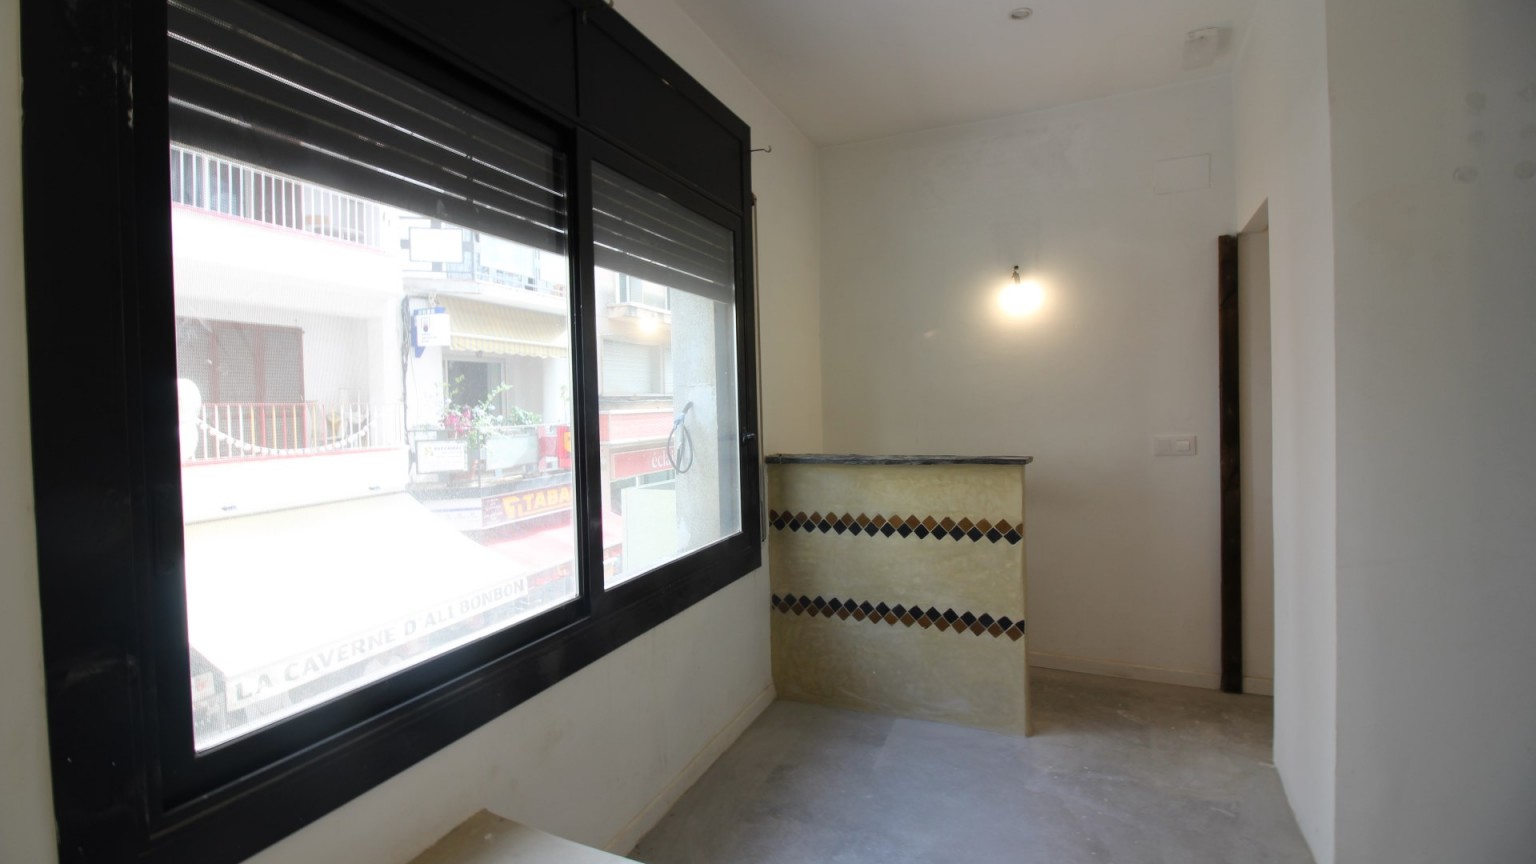 Premises for rent, on first floor, very well located. Ideal for beauty center.